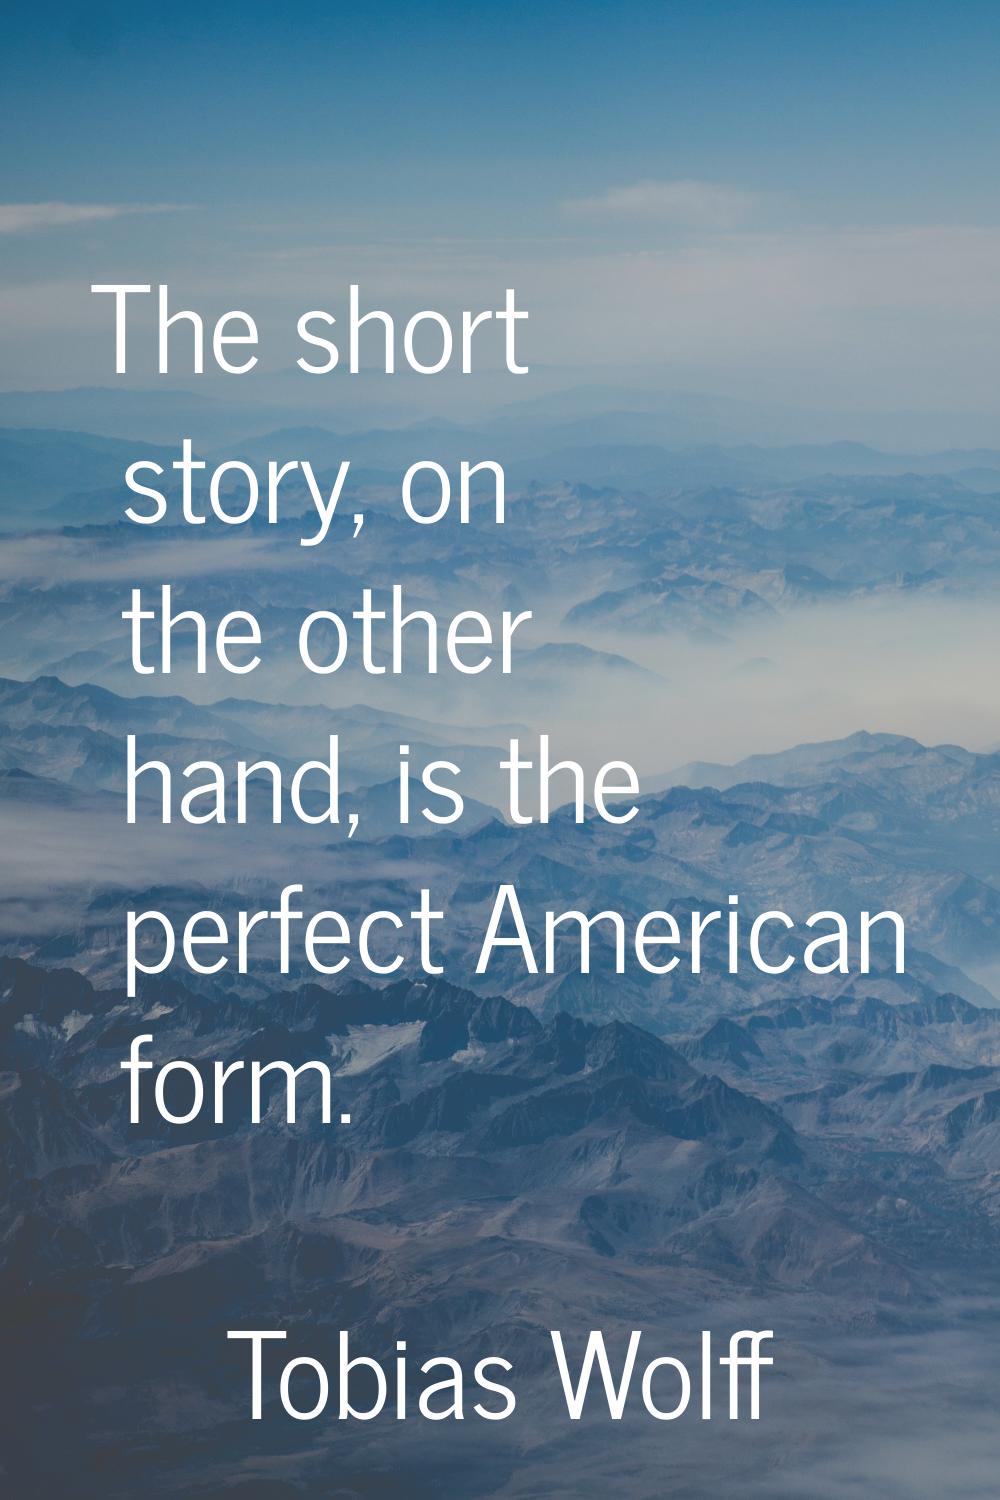 The short story, on the other hand, is the perfect American form.